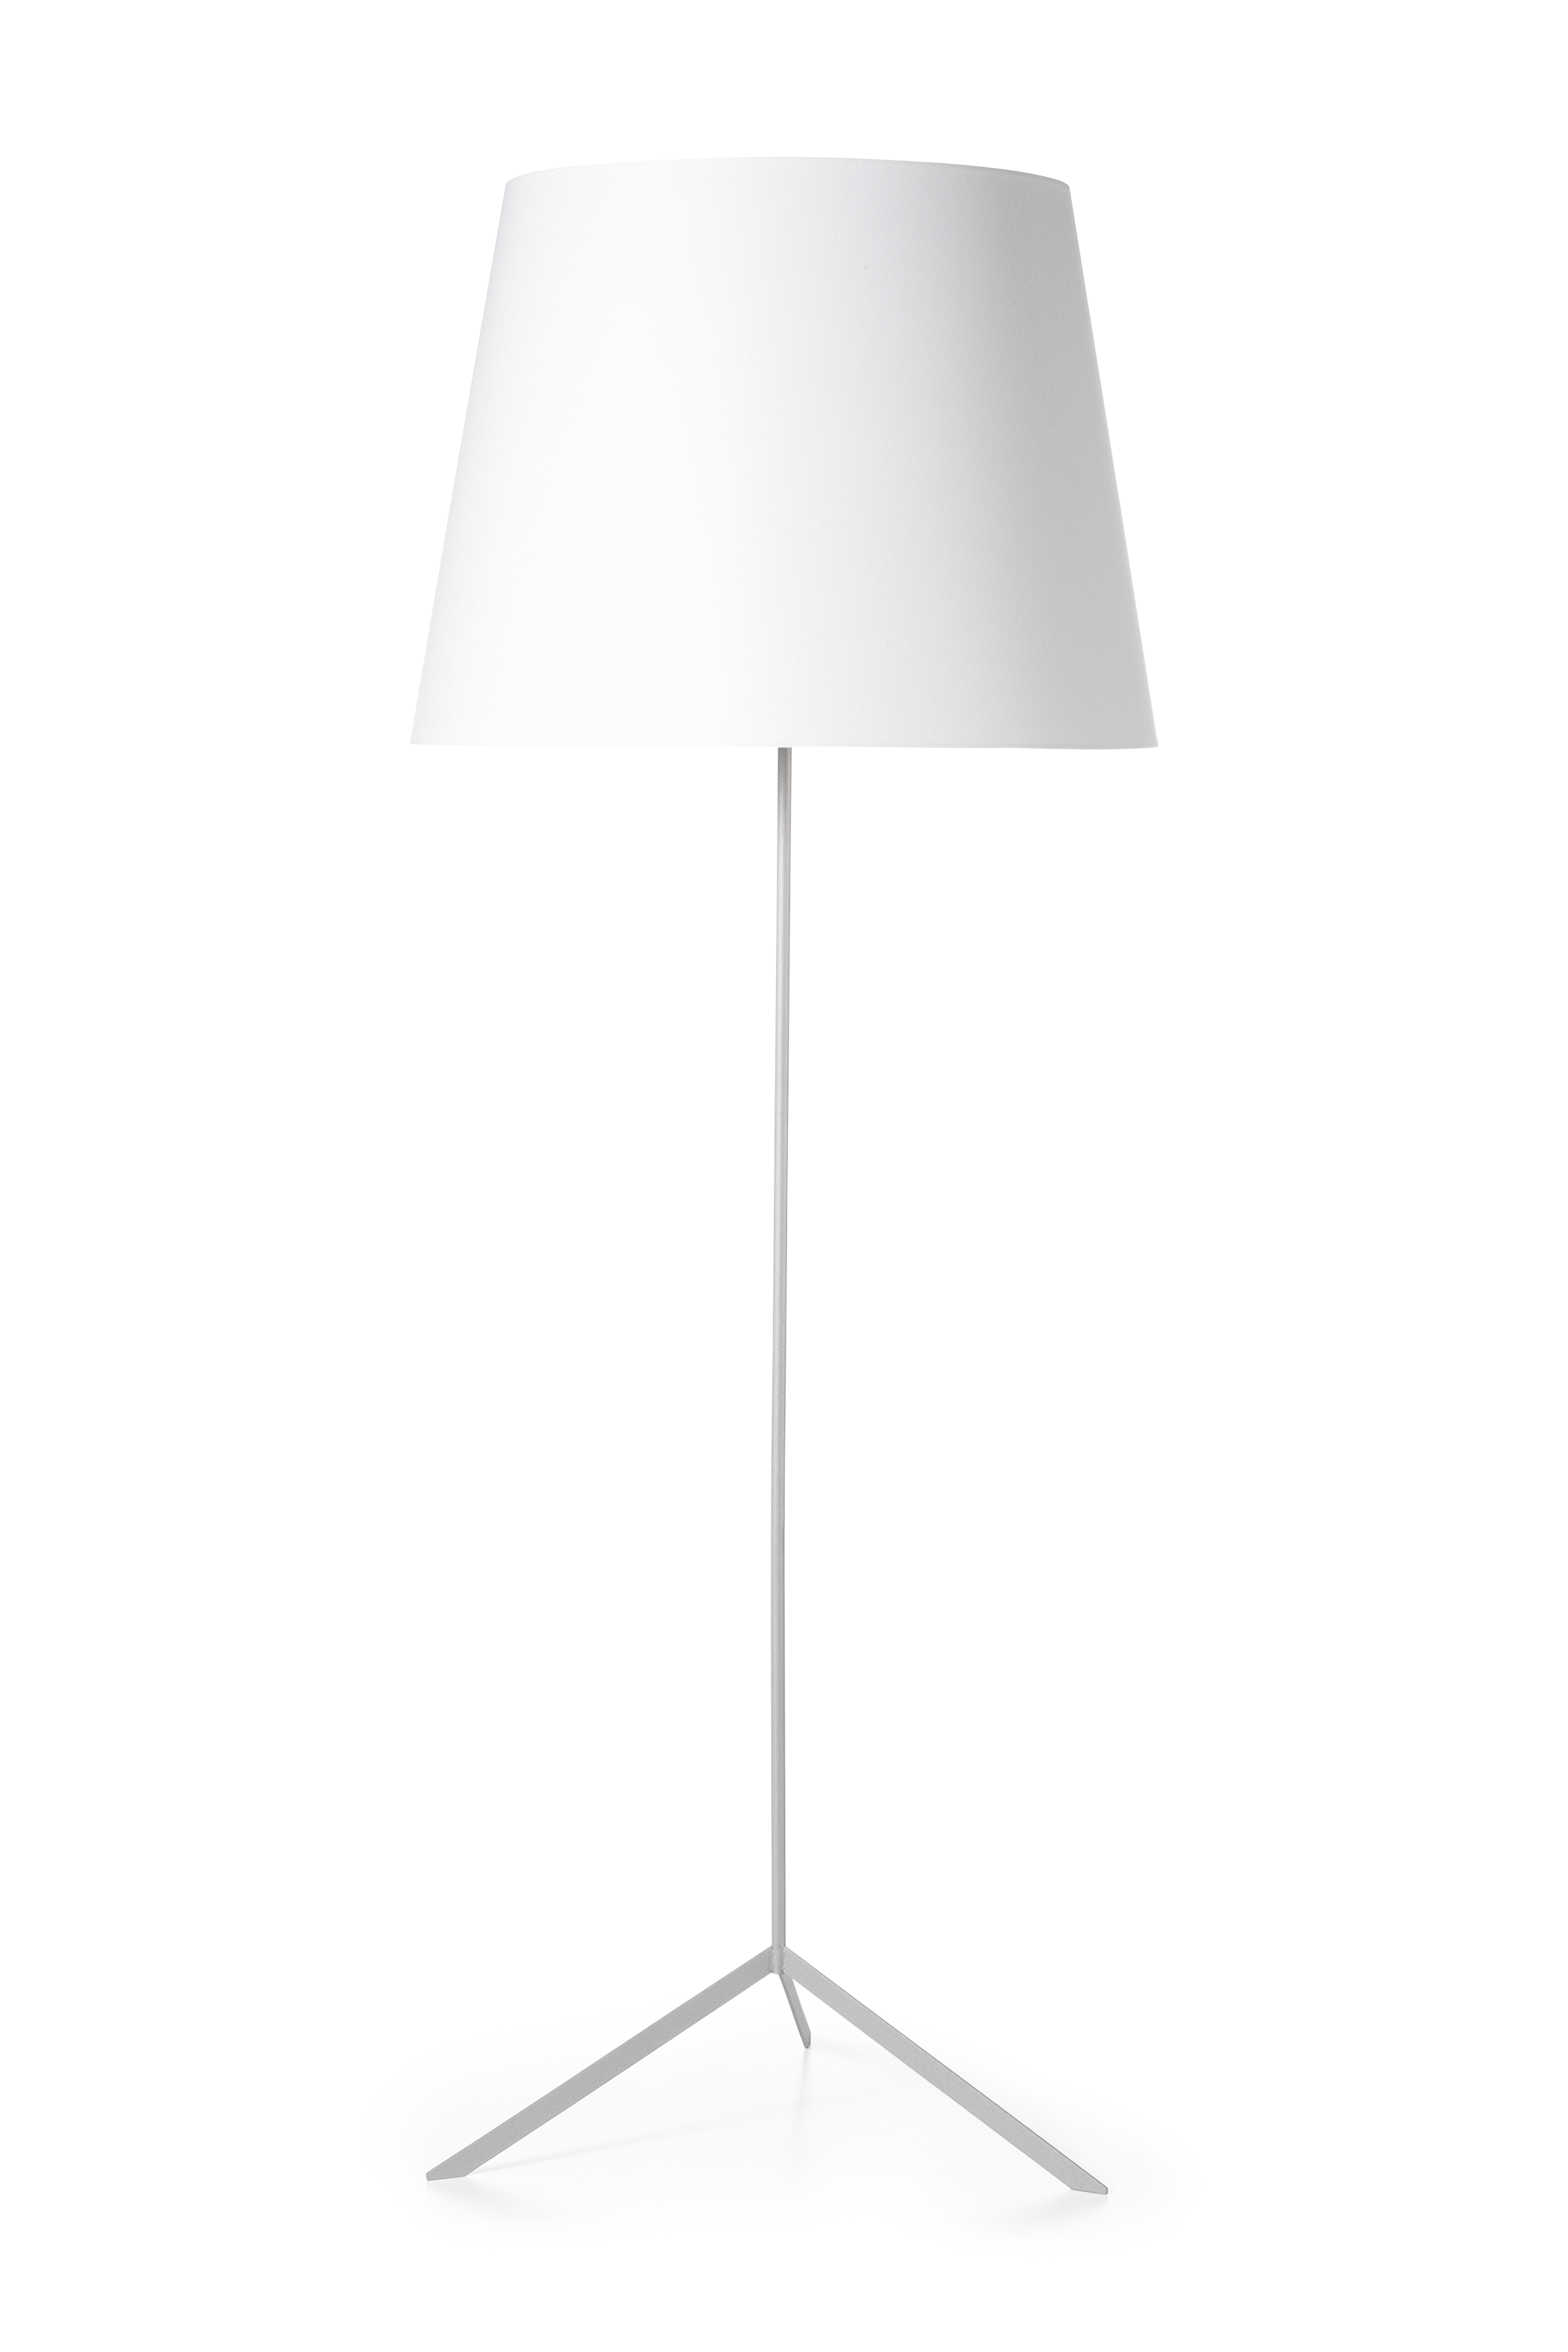 Double Shade floor lamp front side